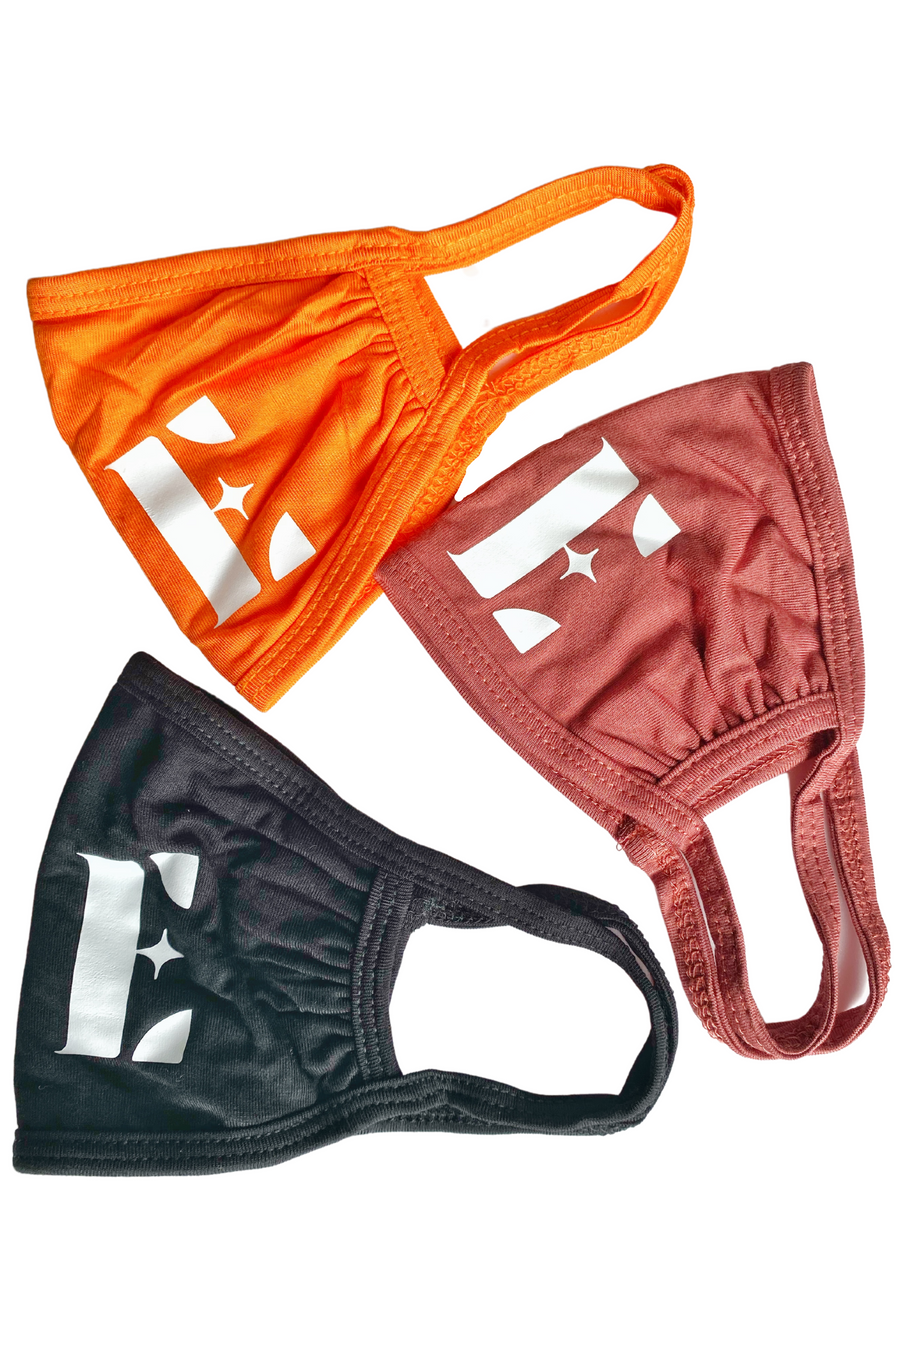 Three of E's Element reusable face masks. The colors are bright orange, light brown, and black. Burnt Orange Face Mask by E's Element.